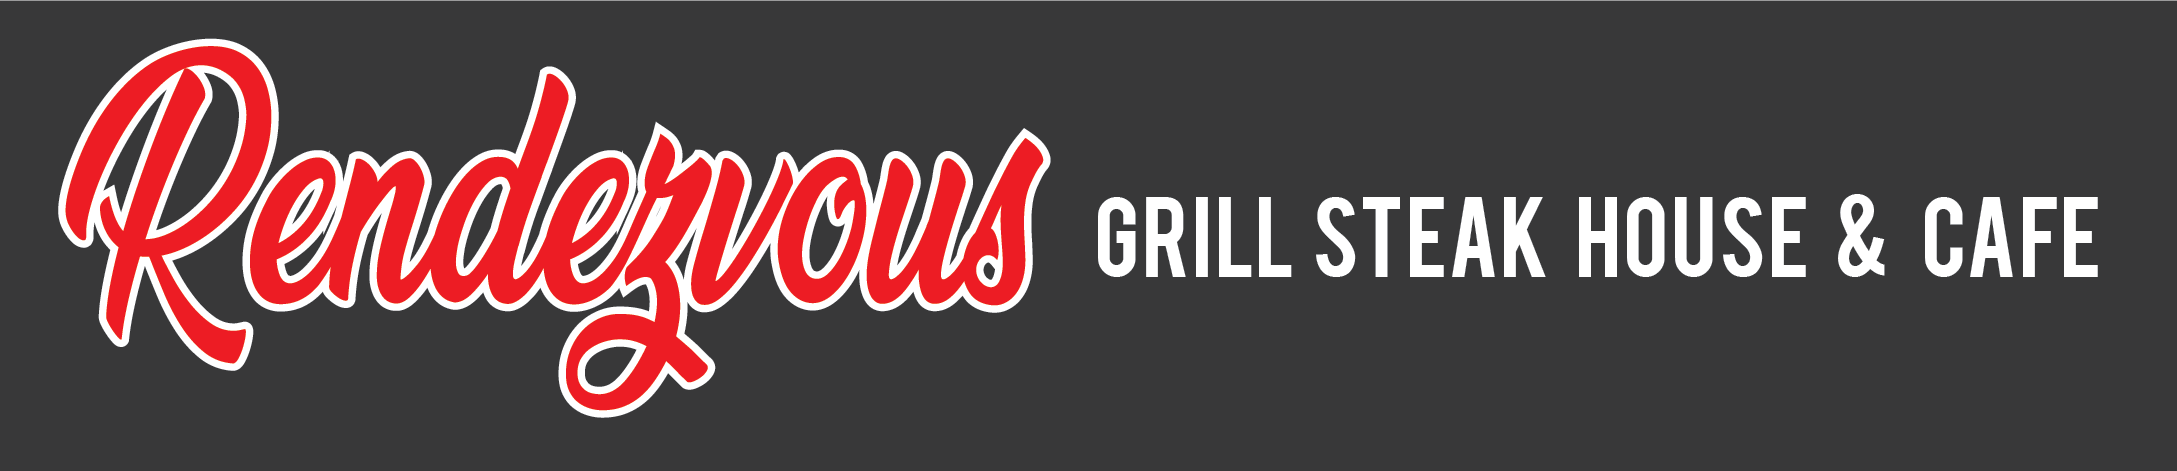 Rendezvous Grill Steak House & Cafe